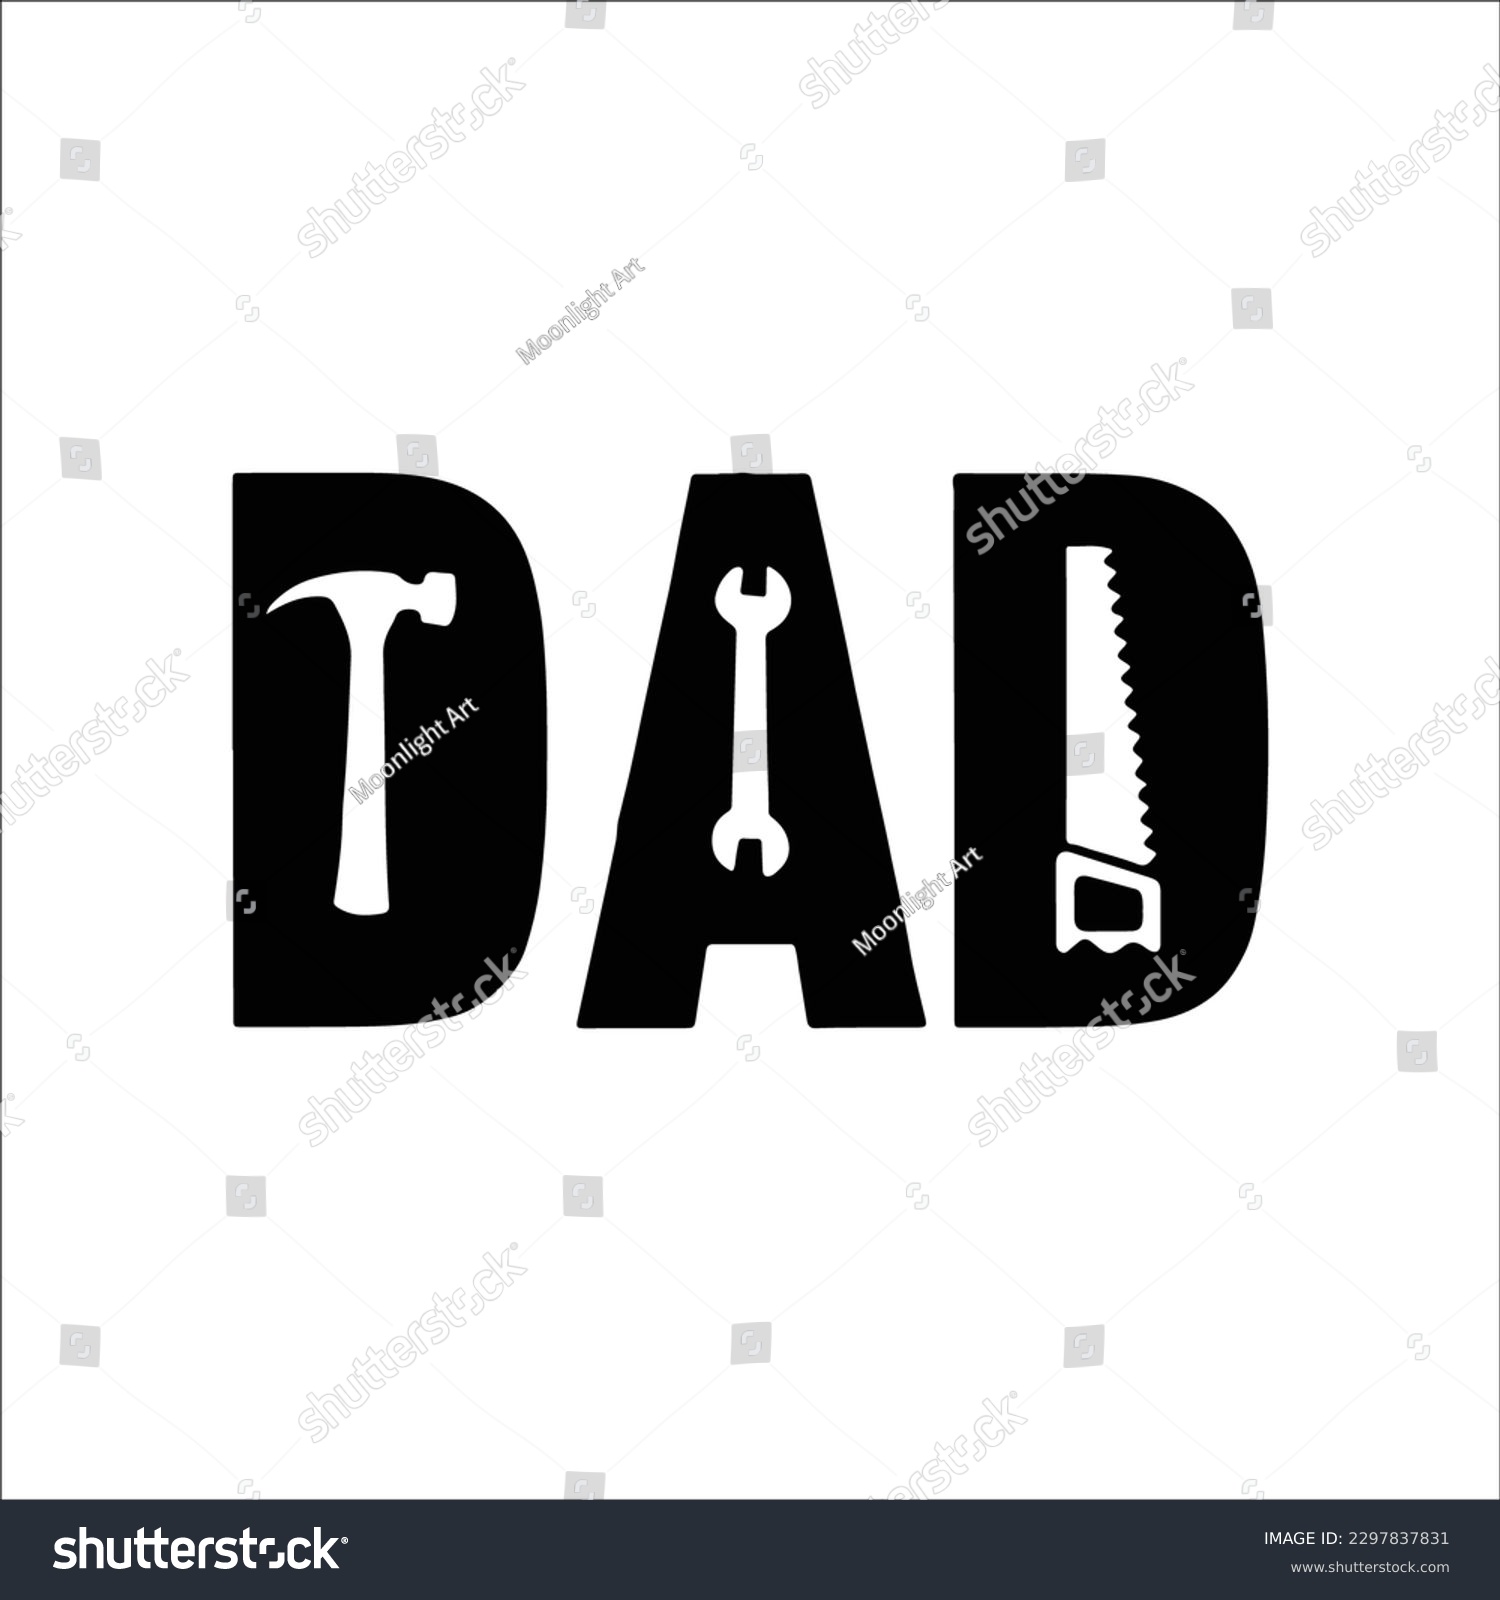 SVG of Father's Day SVG, Gift for Dad Svg, Dad and Tools SVG, Best Dad, Daddy Mechanic tool bag, Dad cut file in Svg svg